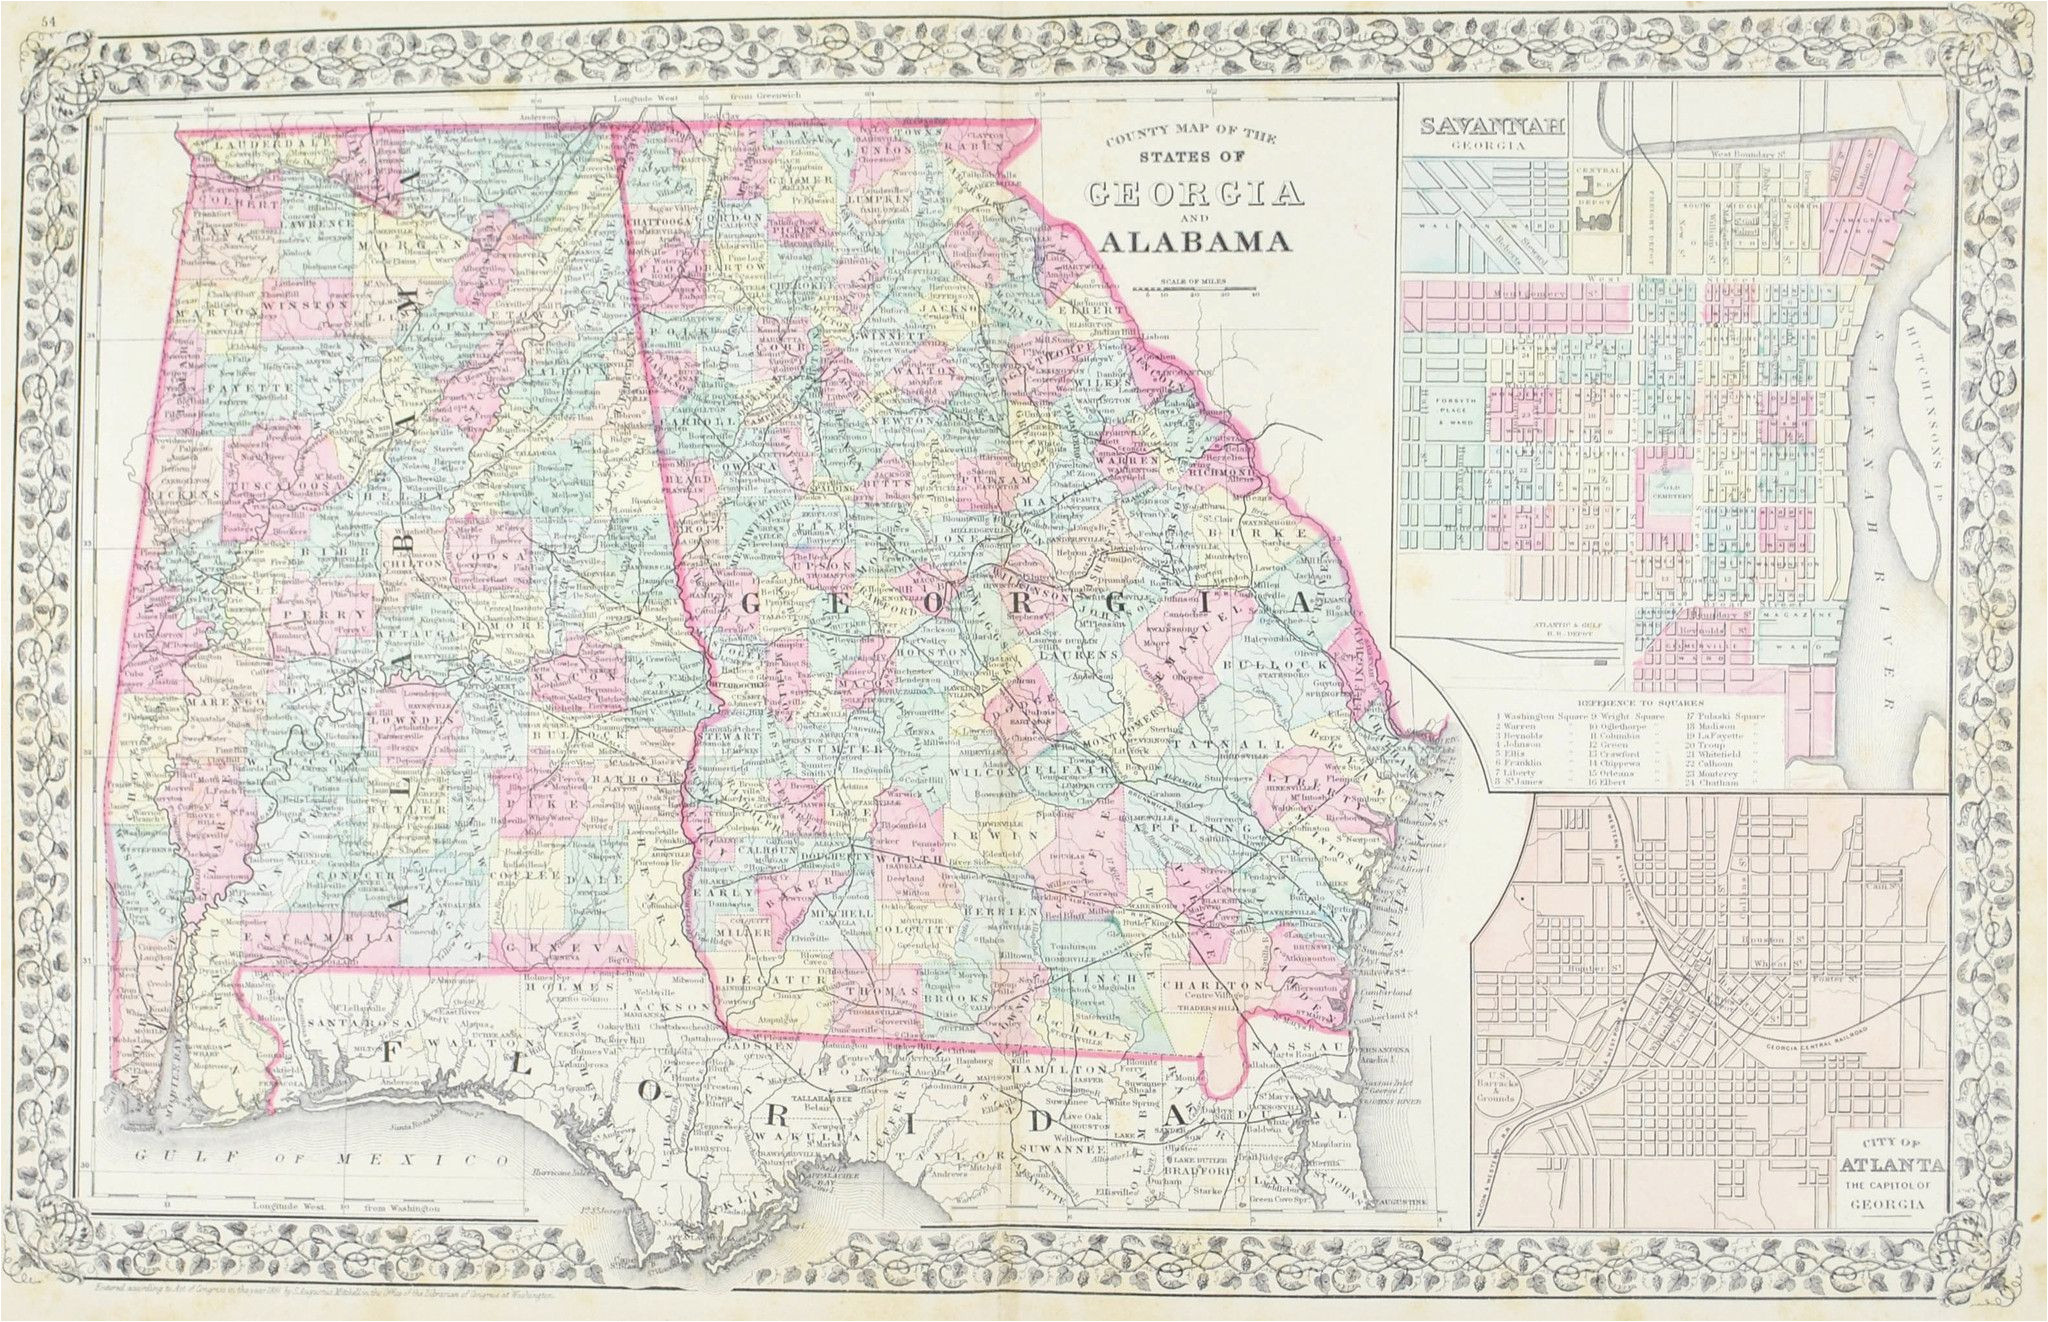 1881 county map of georgia and alabama s mitchell jr products